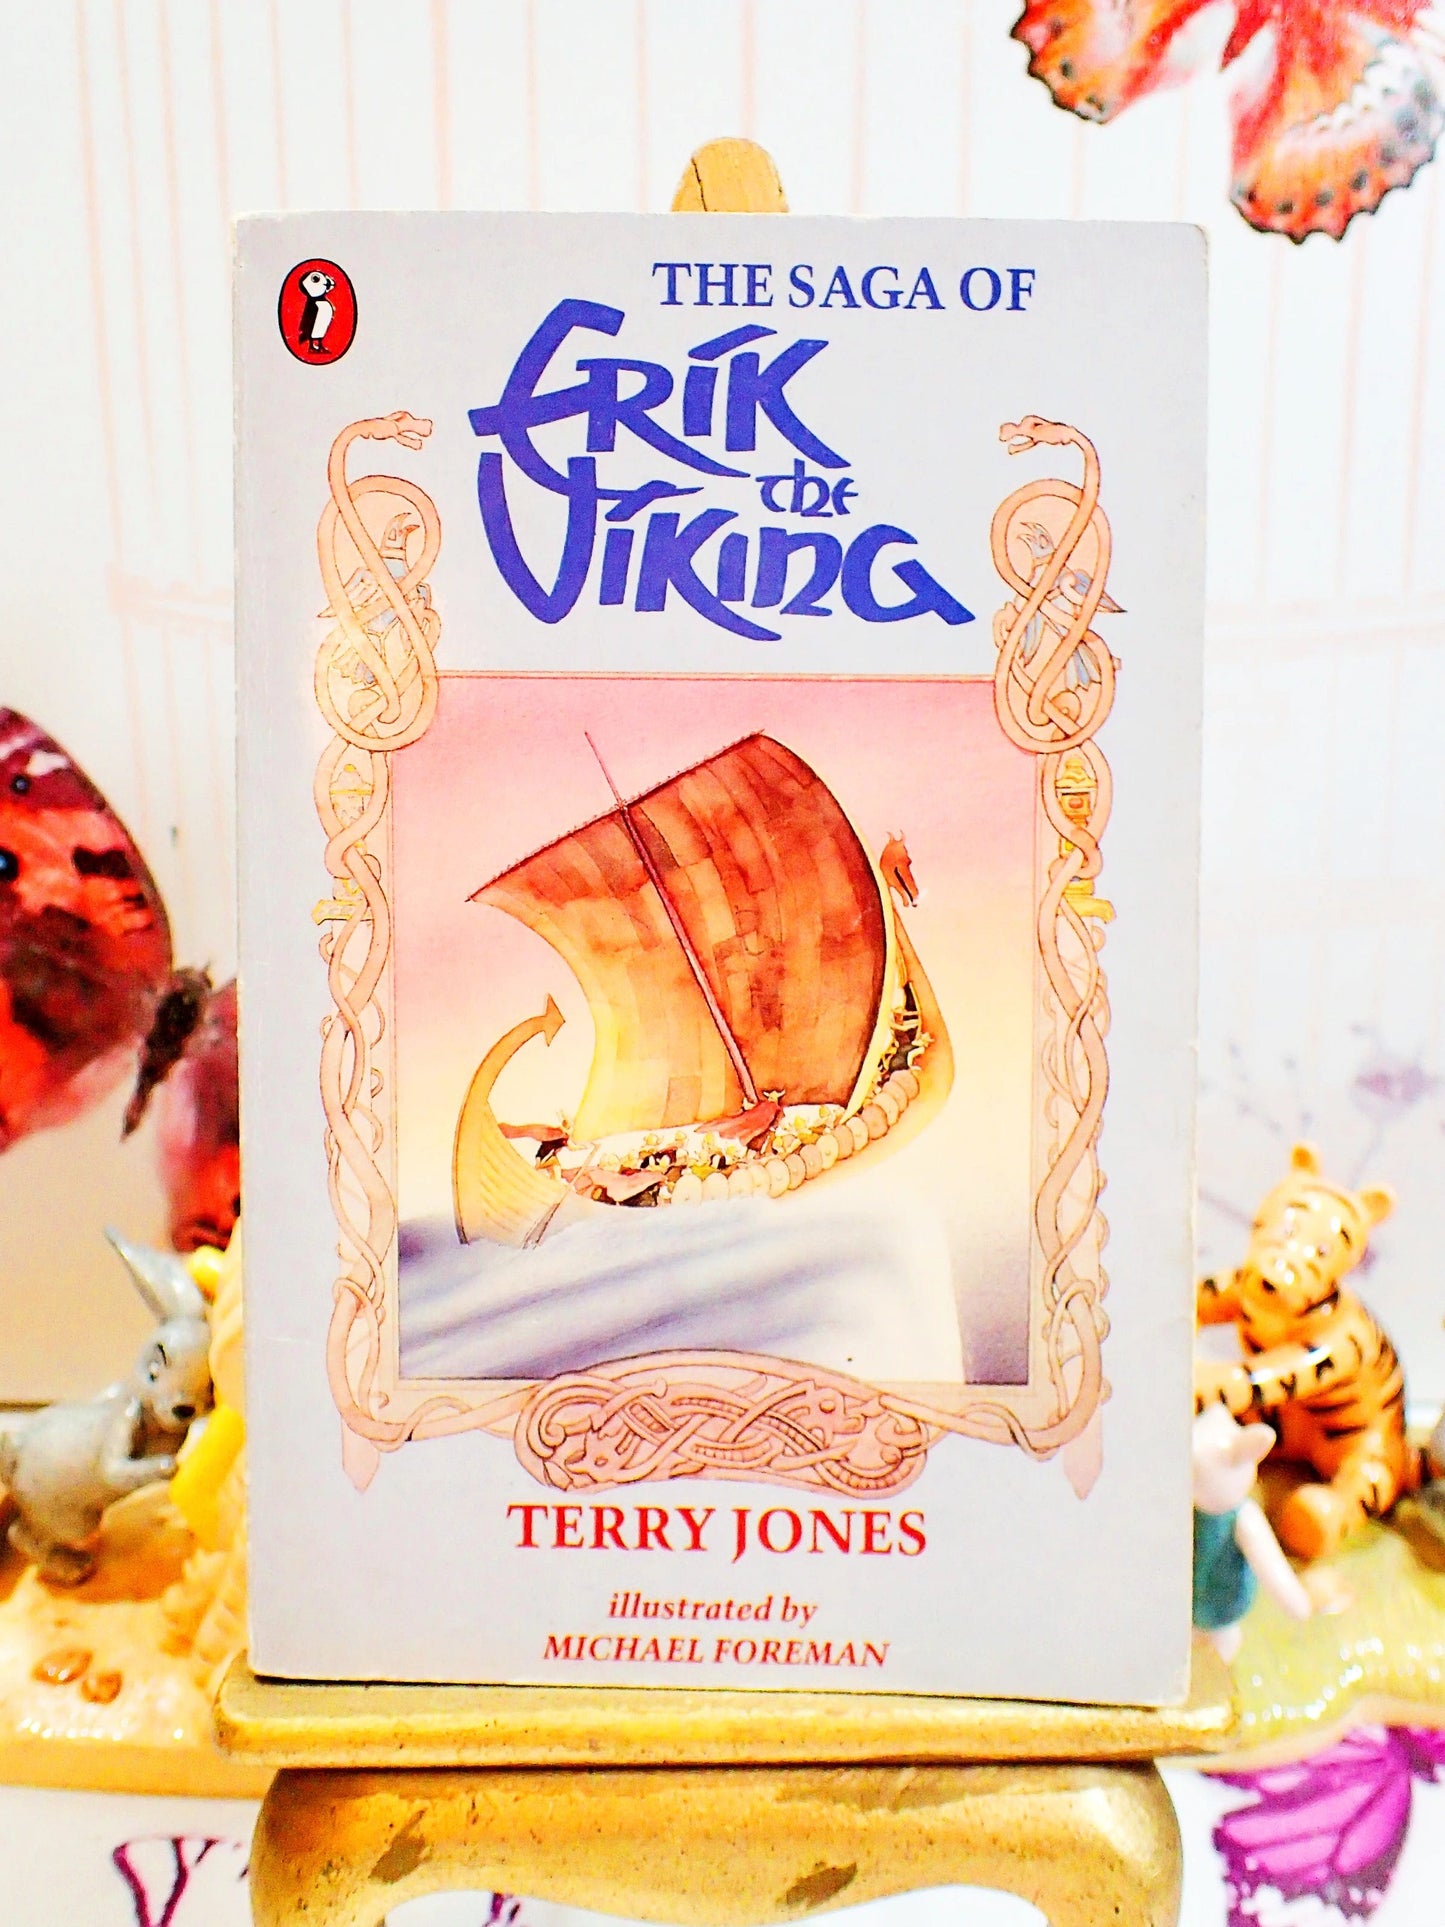 Front cover of The Saga of Erik the Viking by Terry Jones Vintage Puffin Children's Book 1988 showing a Viking Ship sailing against a grey ground with celtic ornamentation. 